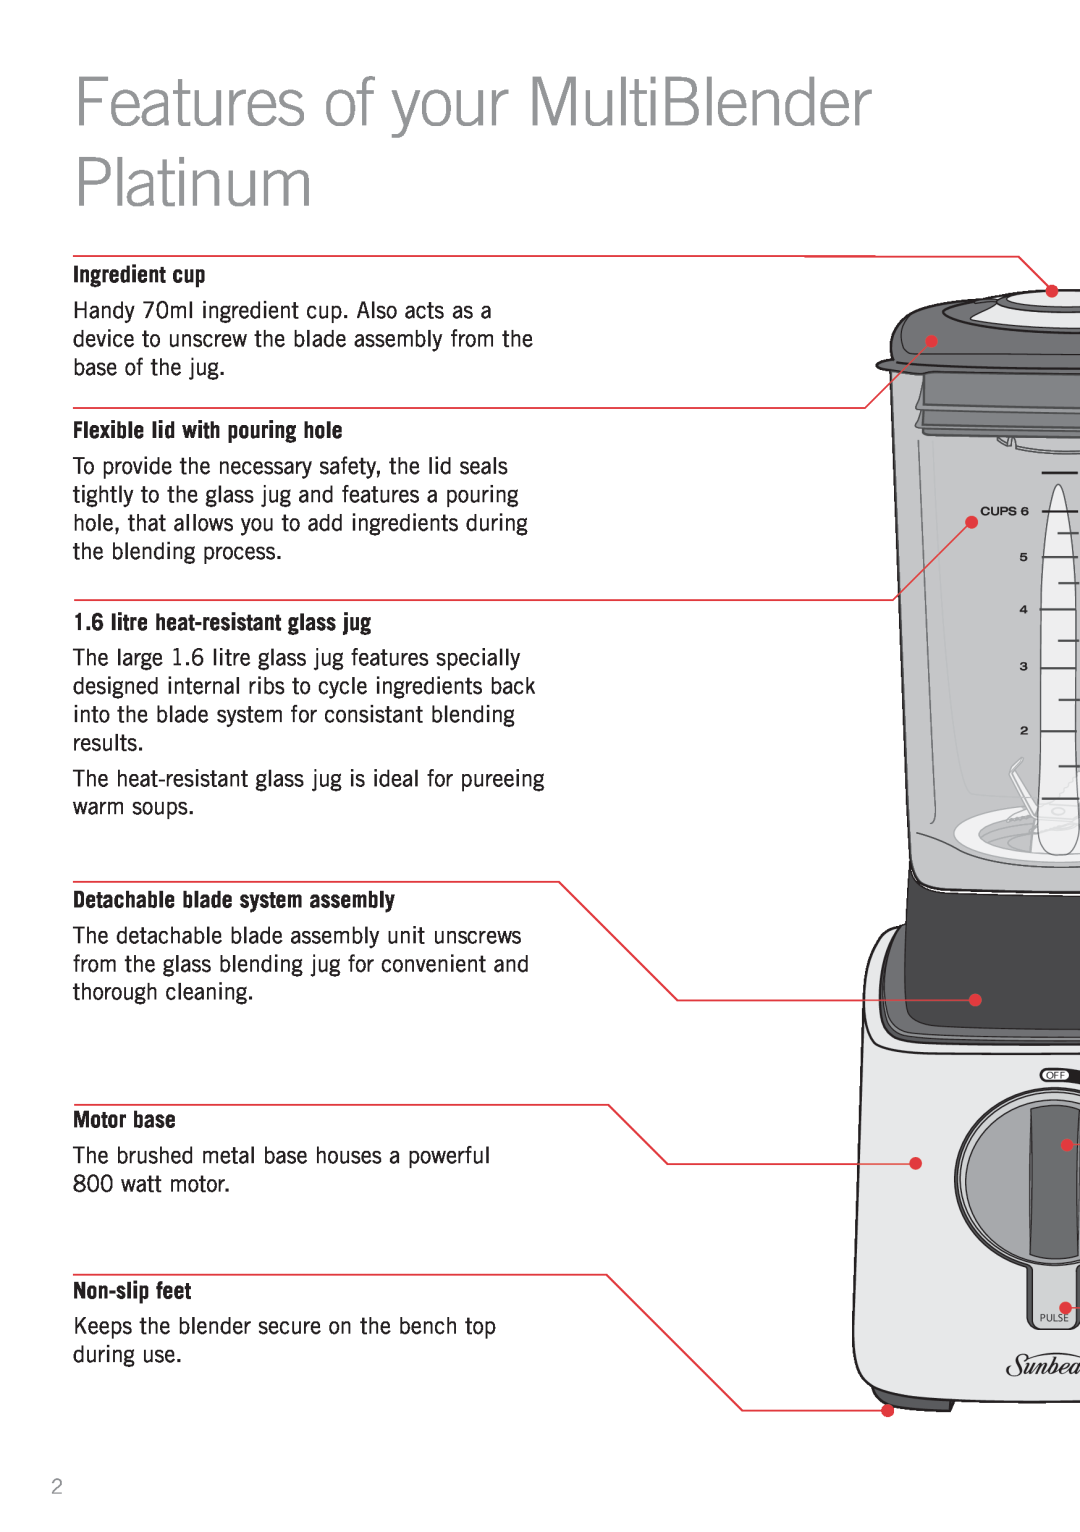 Sunbeam PB7650 manual Features of your MultiBlender Platinum, Ingredient cup, Flexible lid with pouring hole, Motor base 